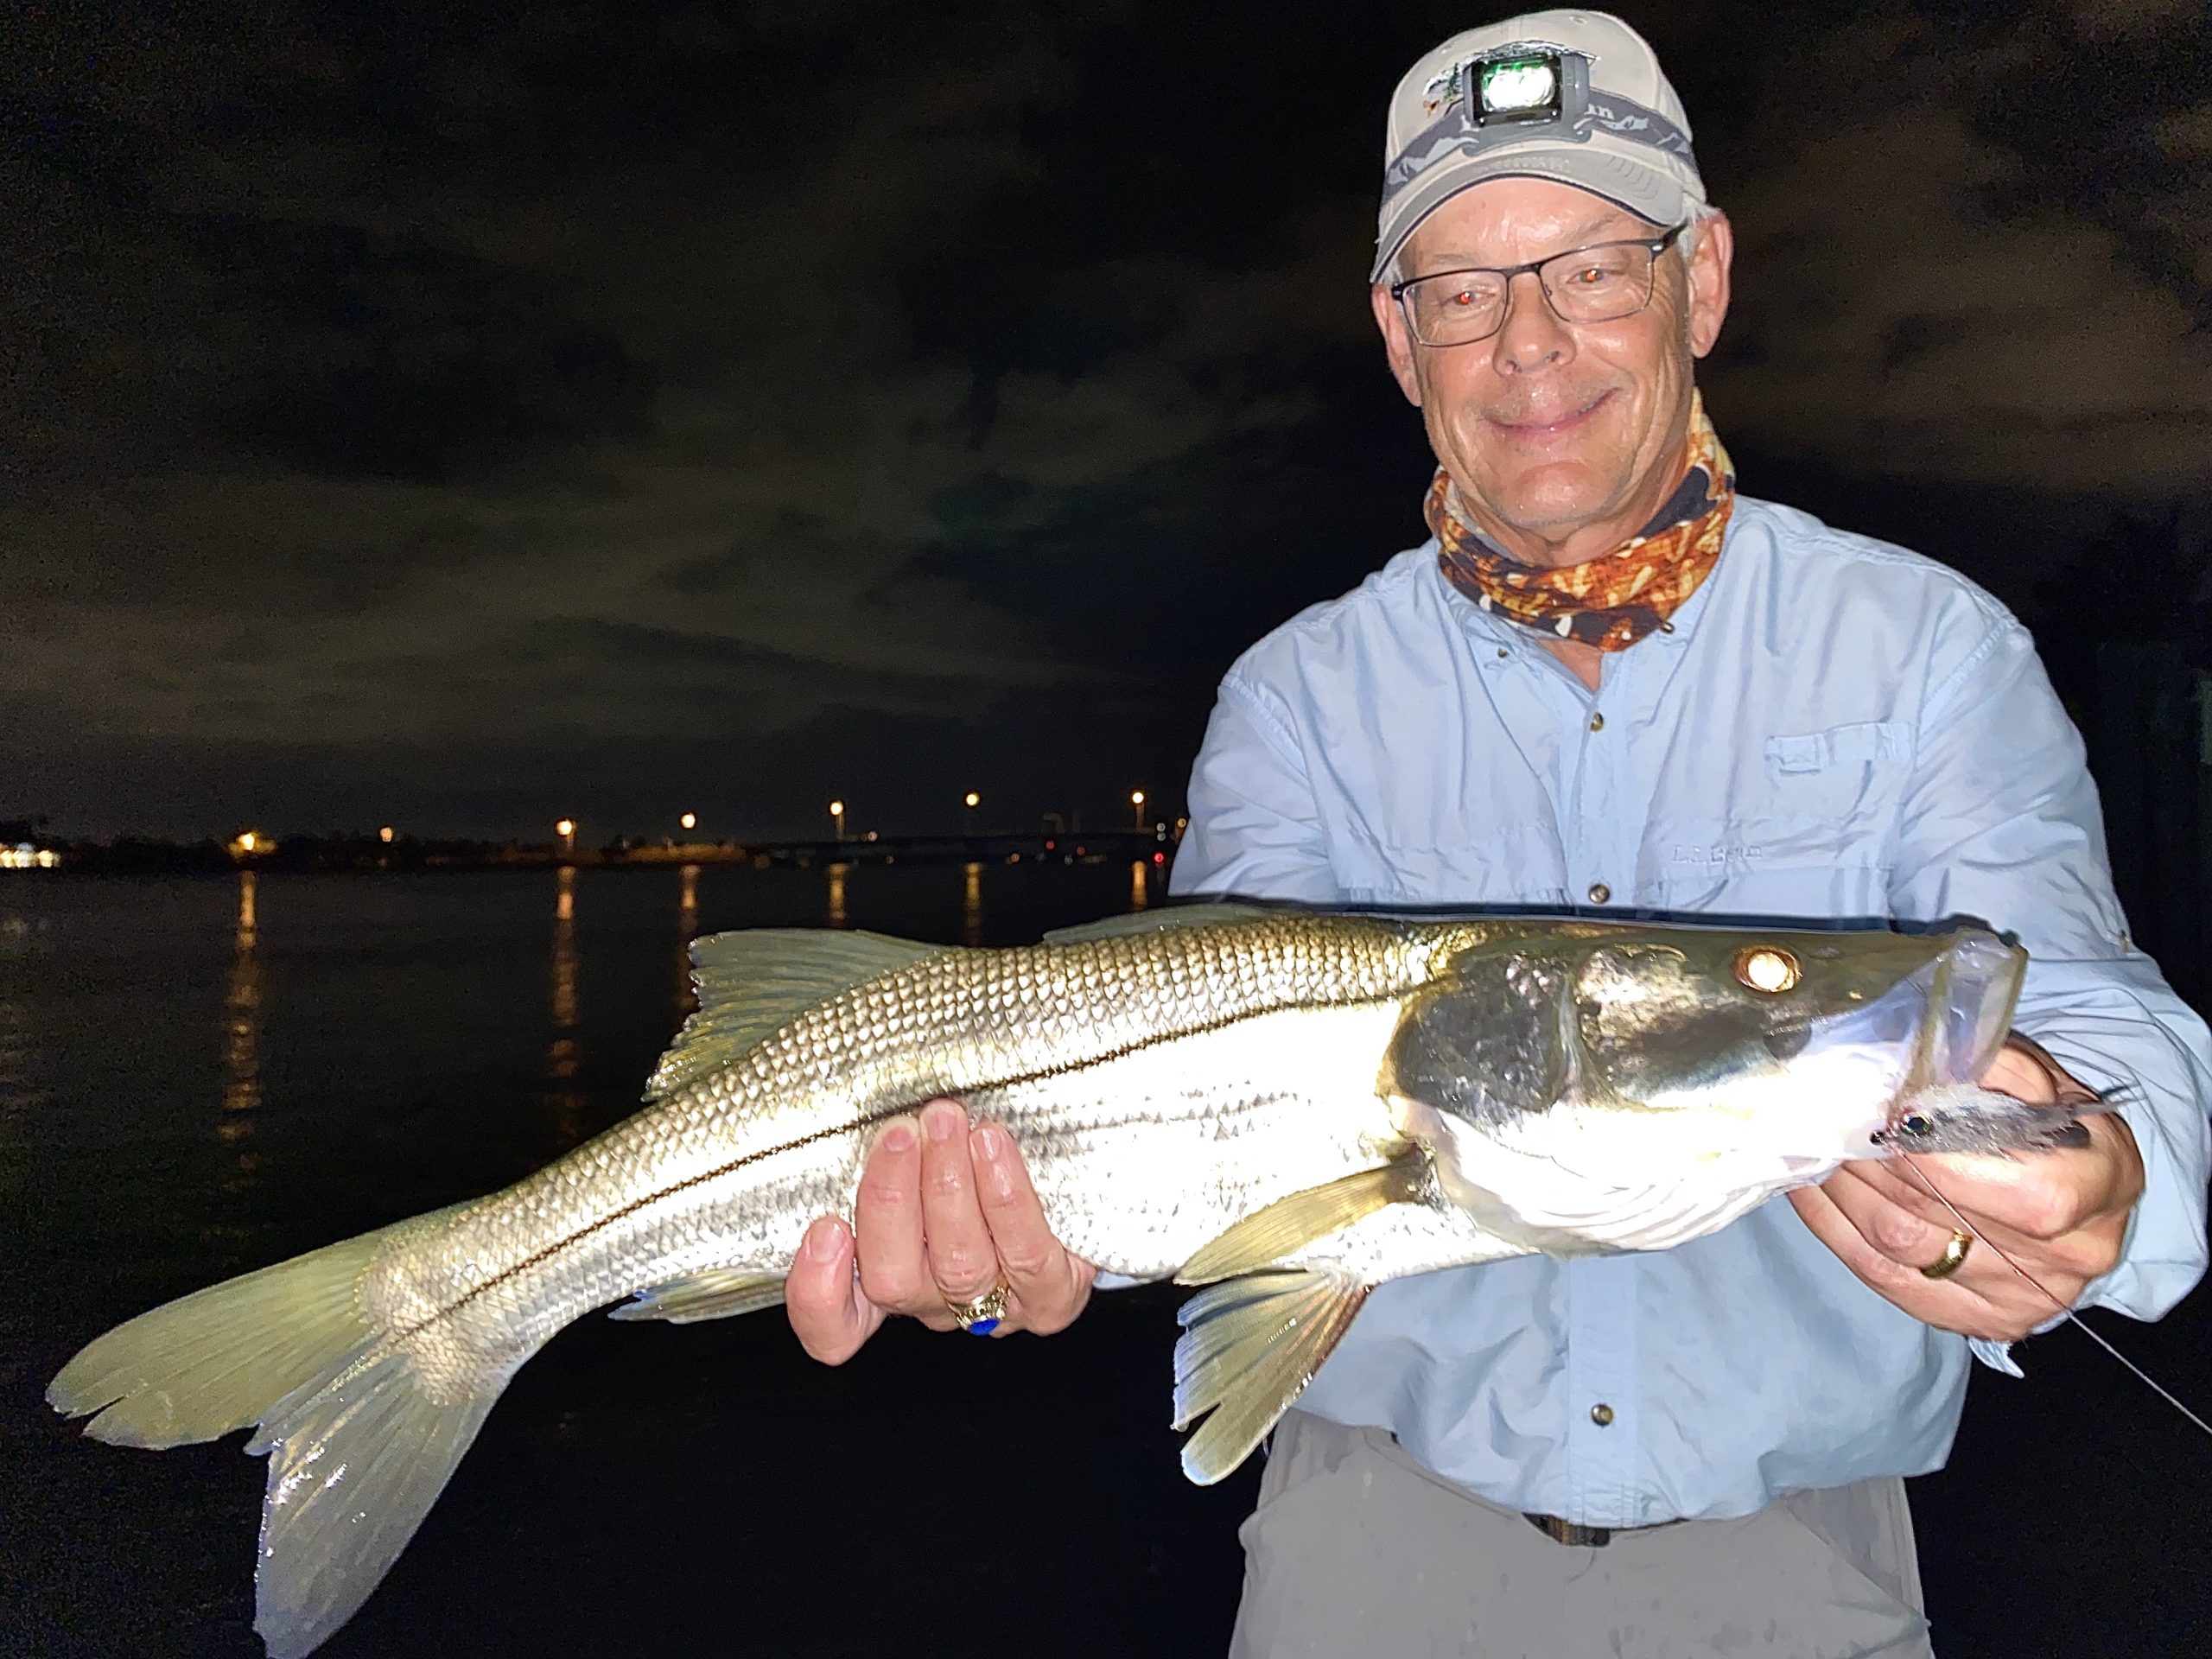 An angler holds a snook up for the camera at night